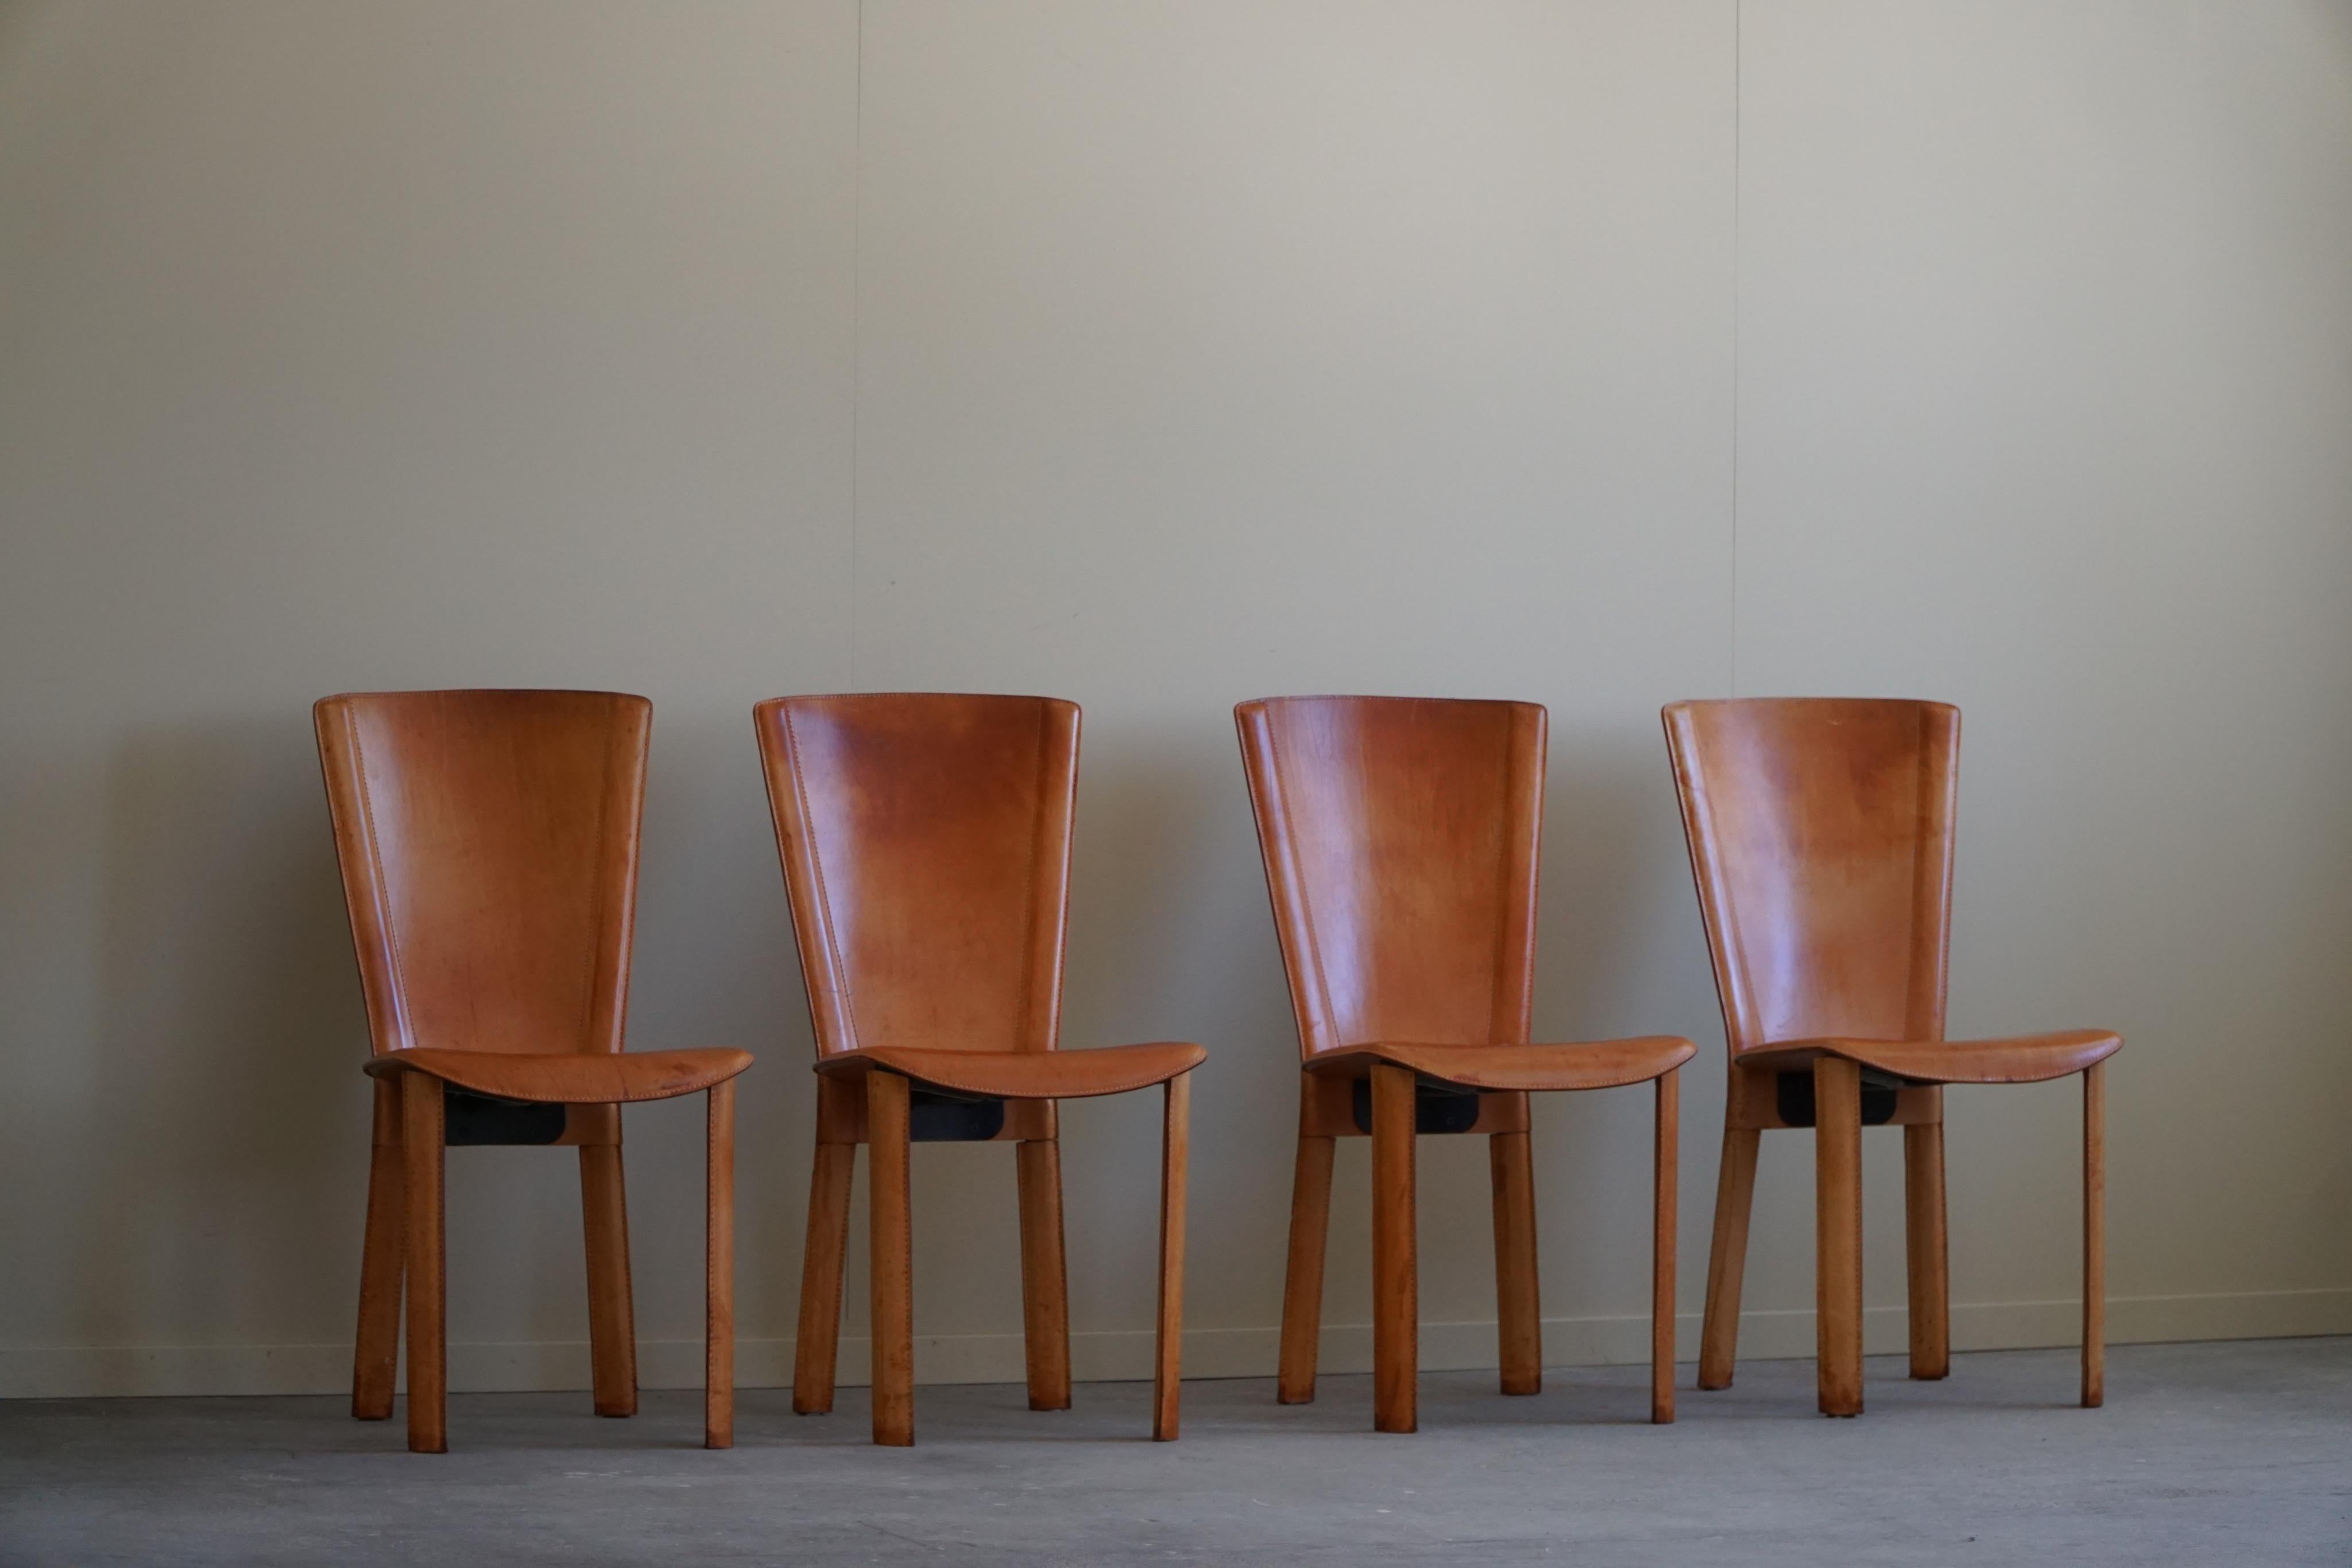 Italian Modern, Set of 4 Dining Chairs in Cognac Leather, Mario Bellini, 1970s 12